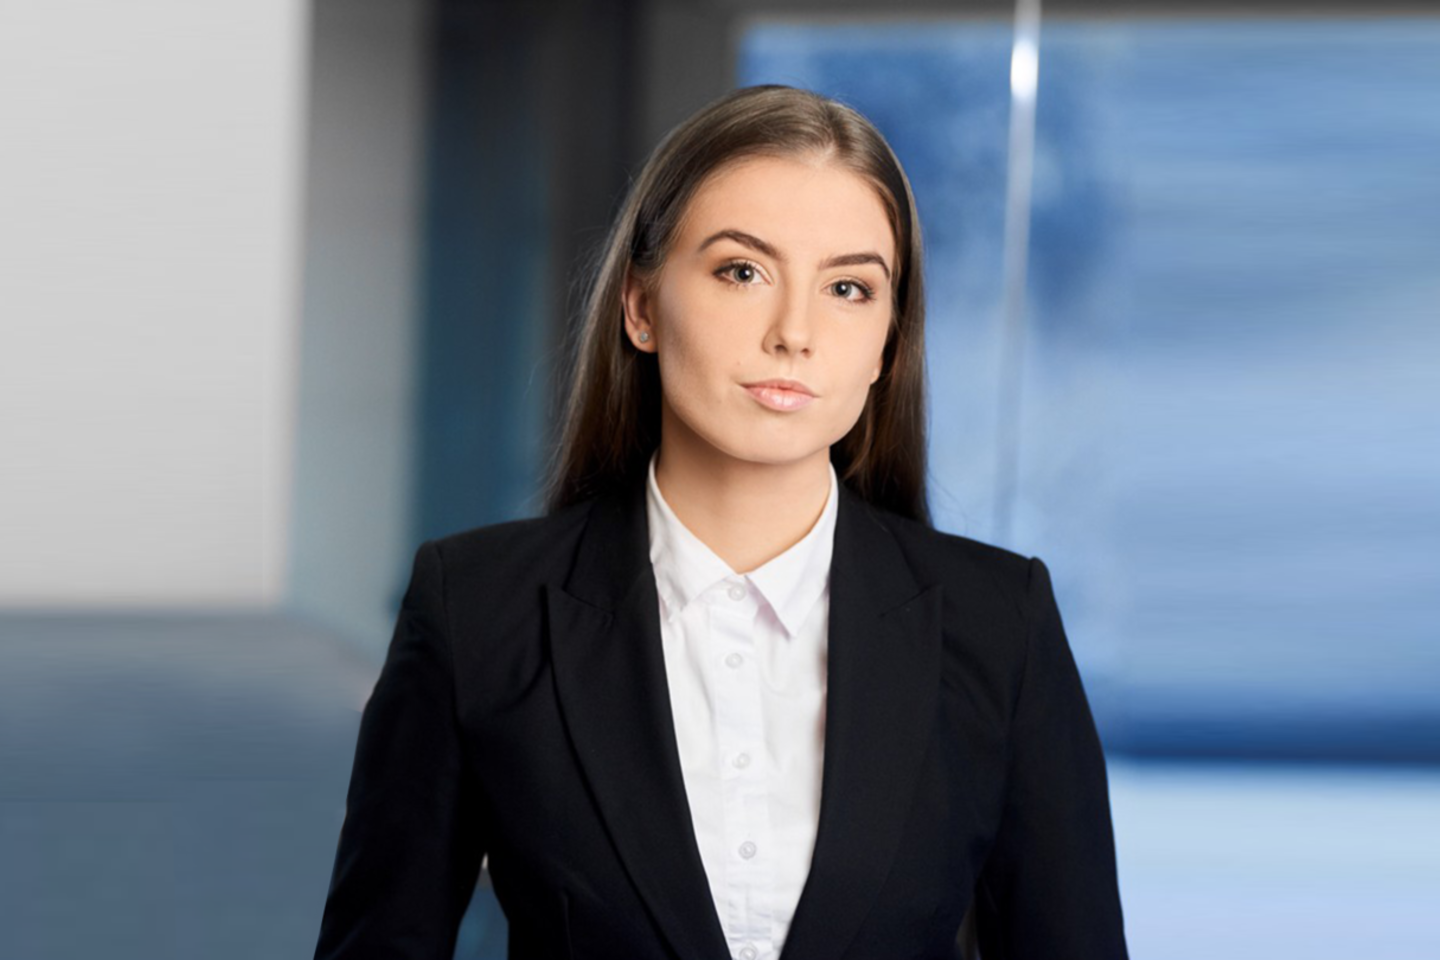 ​Monika Ubavičiūtė, Associate, Assistant Attorney-at-law at Marger law firm.